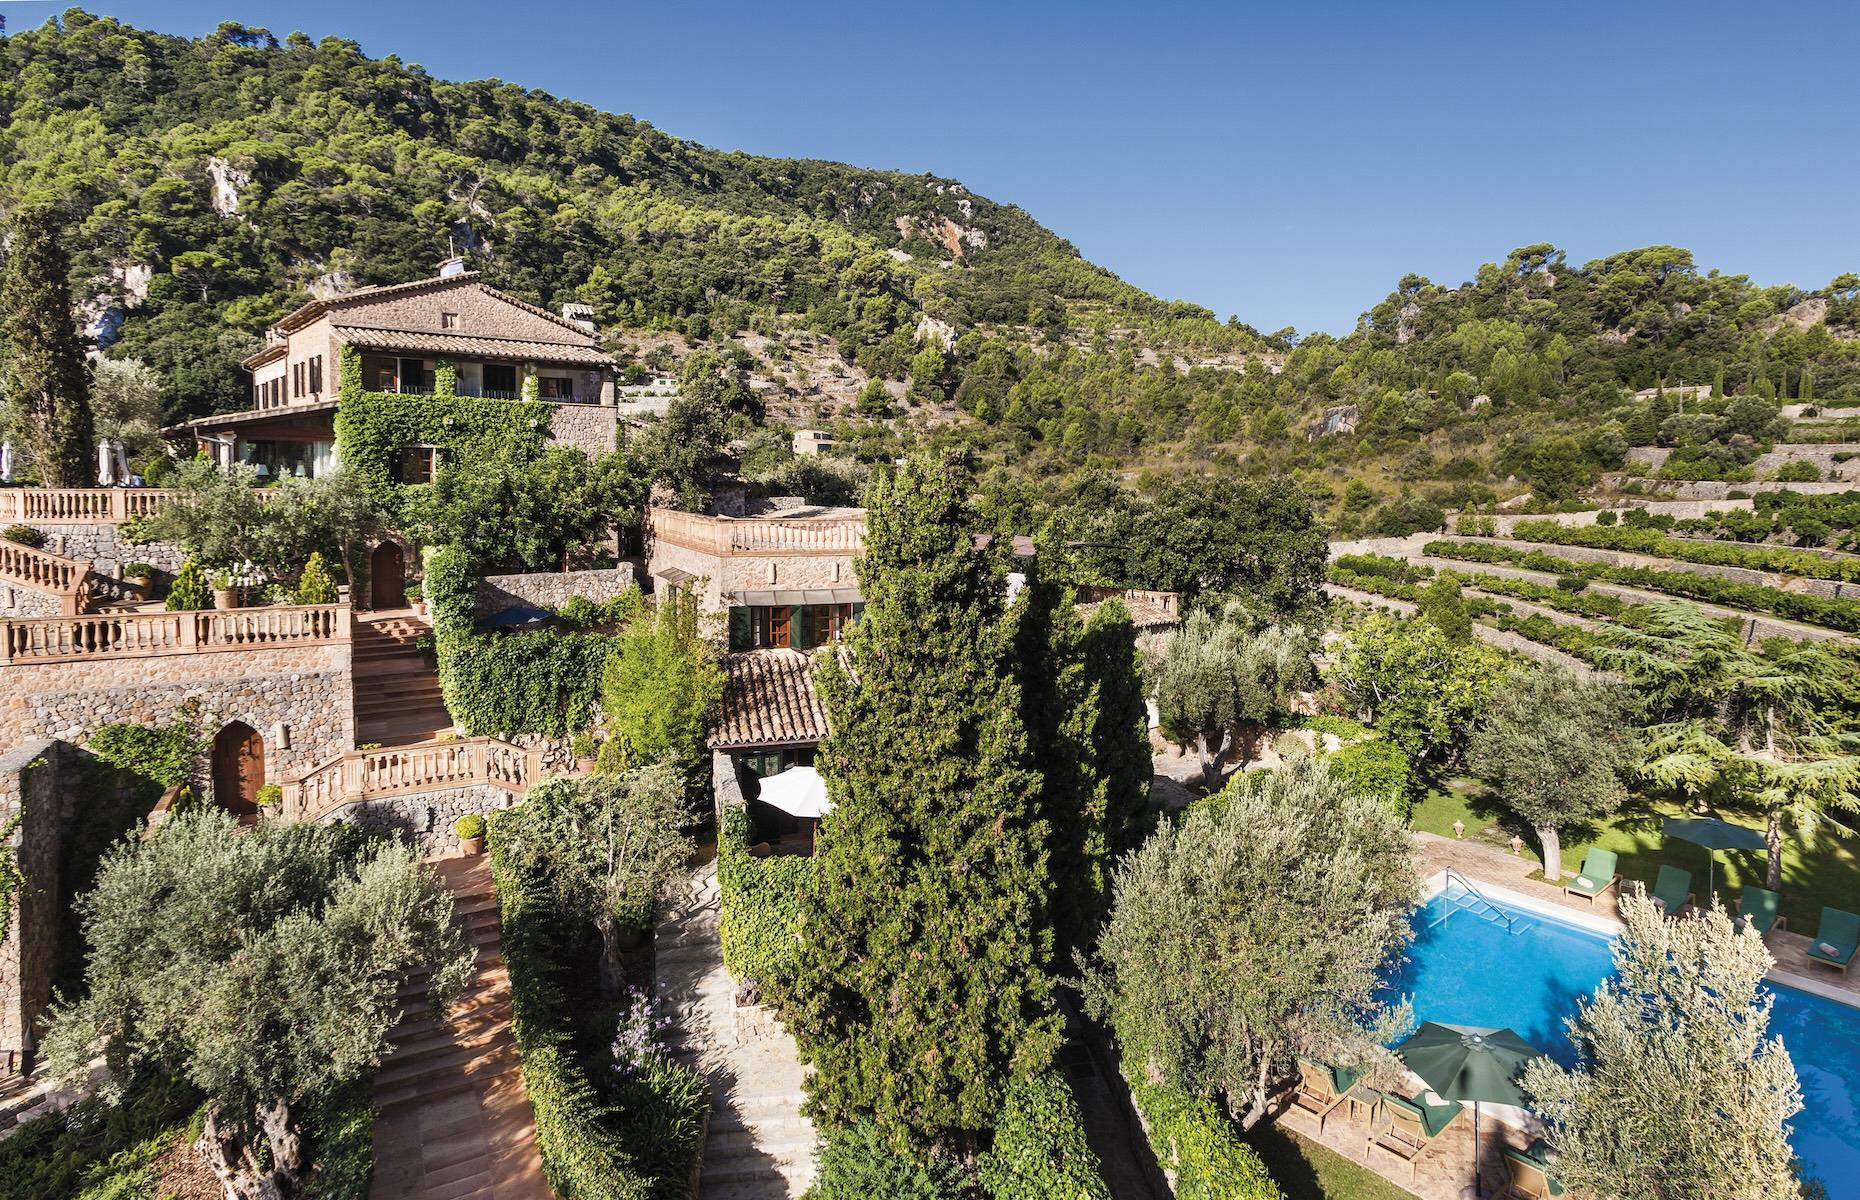 <p>It's adults only at this 12-room rural idyll in the rolling hills of Mallorca's Serra de Tramuntana, and all the more relaxing for it. Opening as part of It Mallorca’s boutique hotel collection this February, Hotel Valldemossa occupies parts of the 19th-century Royal Charter Palace. As well as lashings of character, its spa and gastronomy will be top notch. Japanese and Peruvian cuisine with a Mediterranean twist will be on the menu at De Tokio a Lima, outpost of a Palma restaurant. If traditional tapas and island wine is more your vibe than ceviche and pisco sours, Valldemossa village and its restaurants are a short and scenic stroll from the grounds.</p>